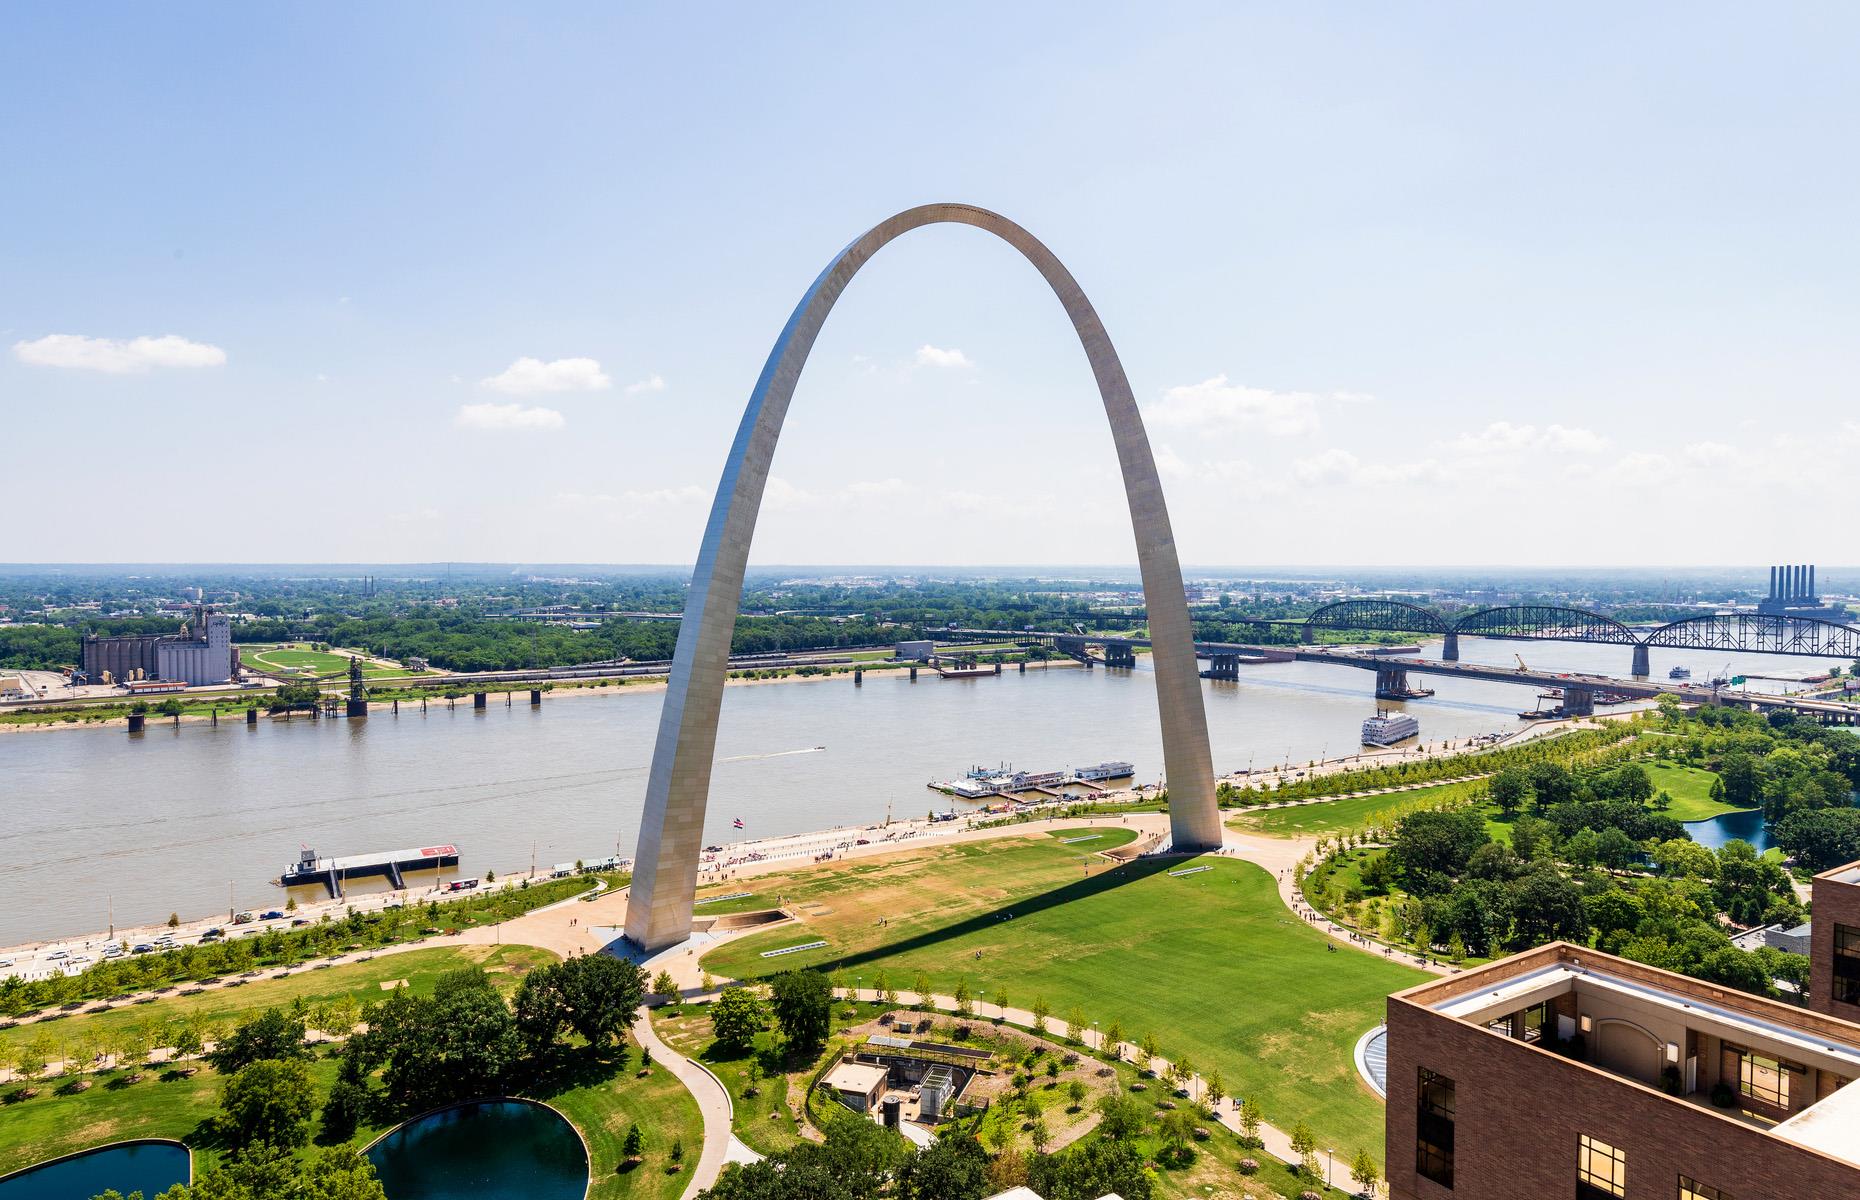 <p><a href="https://www.gatewayarch.com">This imposing riverfront arch</a> presides over the city of St Louis and has become a symbol of Missouri state. Intended to celebrate the westward expansion of the US in the 1800s, the arch reaches a whopping 630 feet (192m), earning it the status of the largest man-made monument in the USA. Today, visitors can take a tram ride to the top for mesmerizing views over the city and explore the museum detailing the story of the expansion of the US, with a special focus on St Louis.</p>